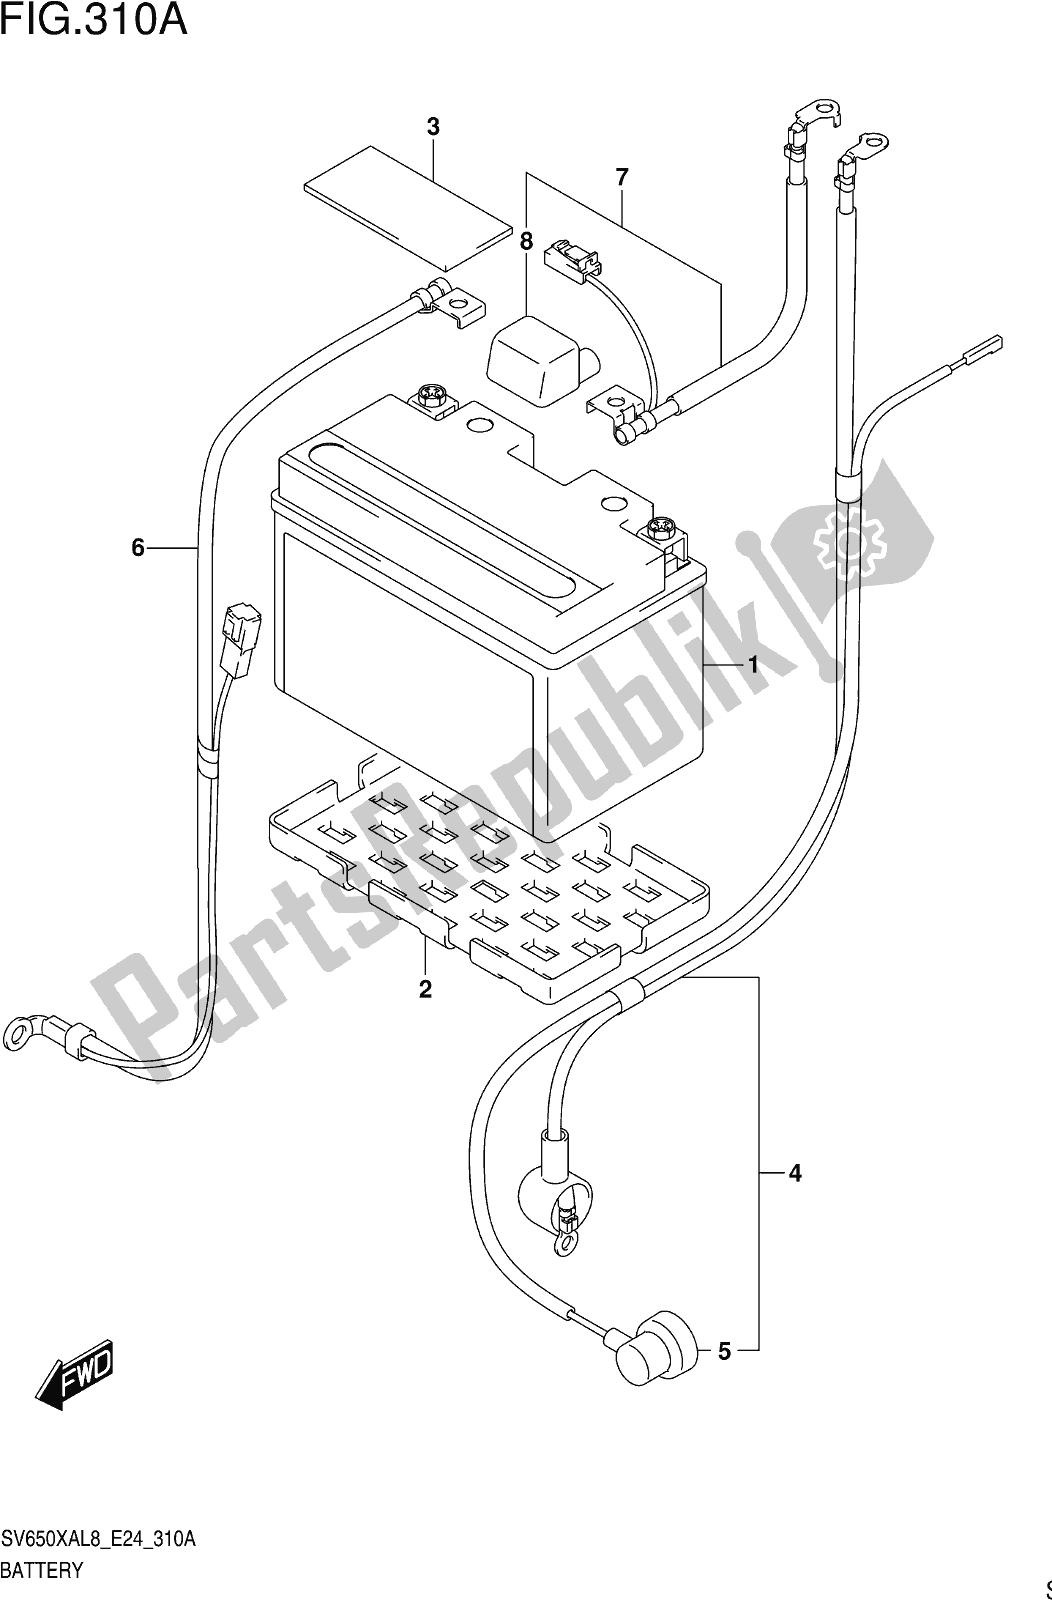 All parts for the Fig. 310a Battery of the Suzuki SV 650 XA 2018